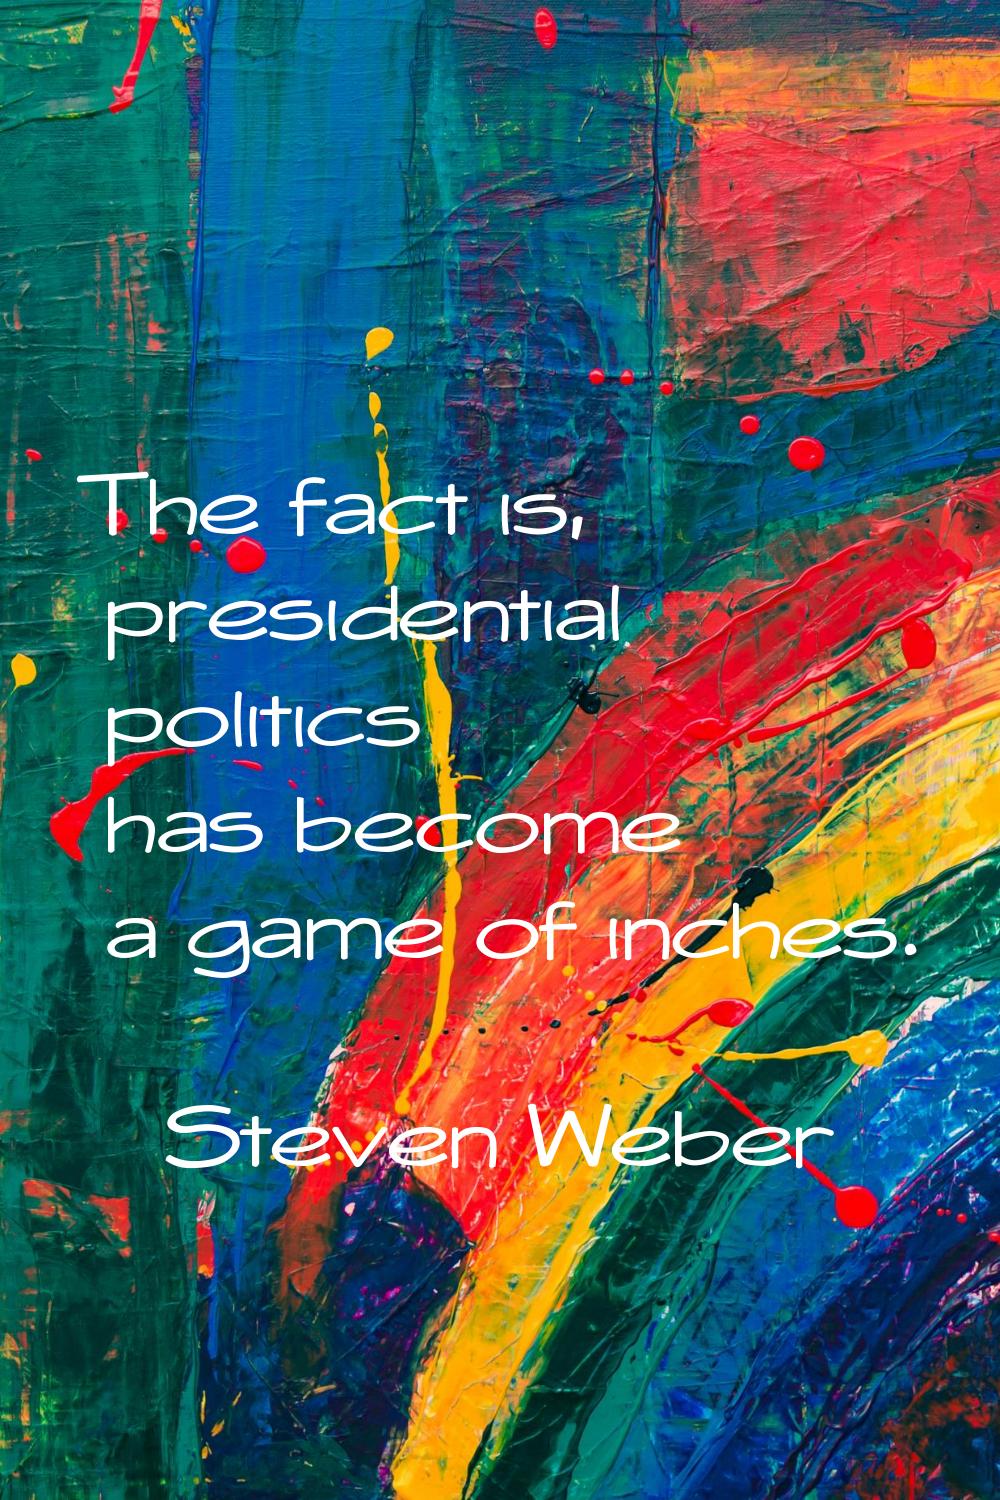 The fact is, presidential politics has become a game of inches.